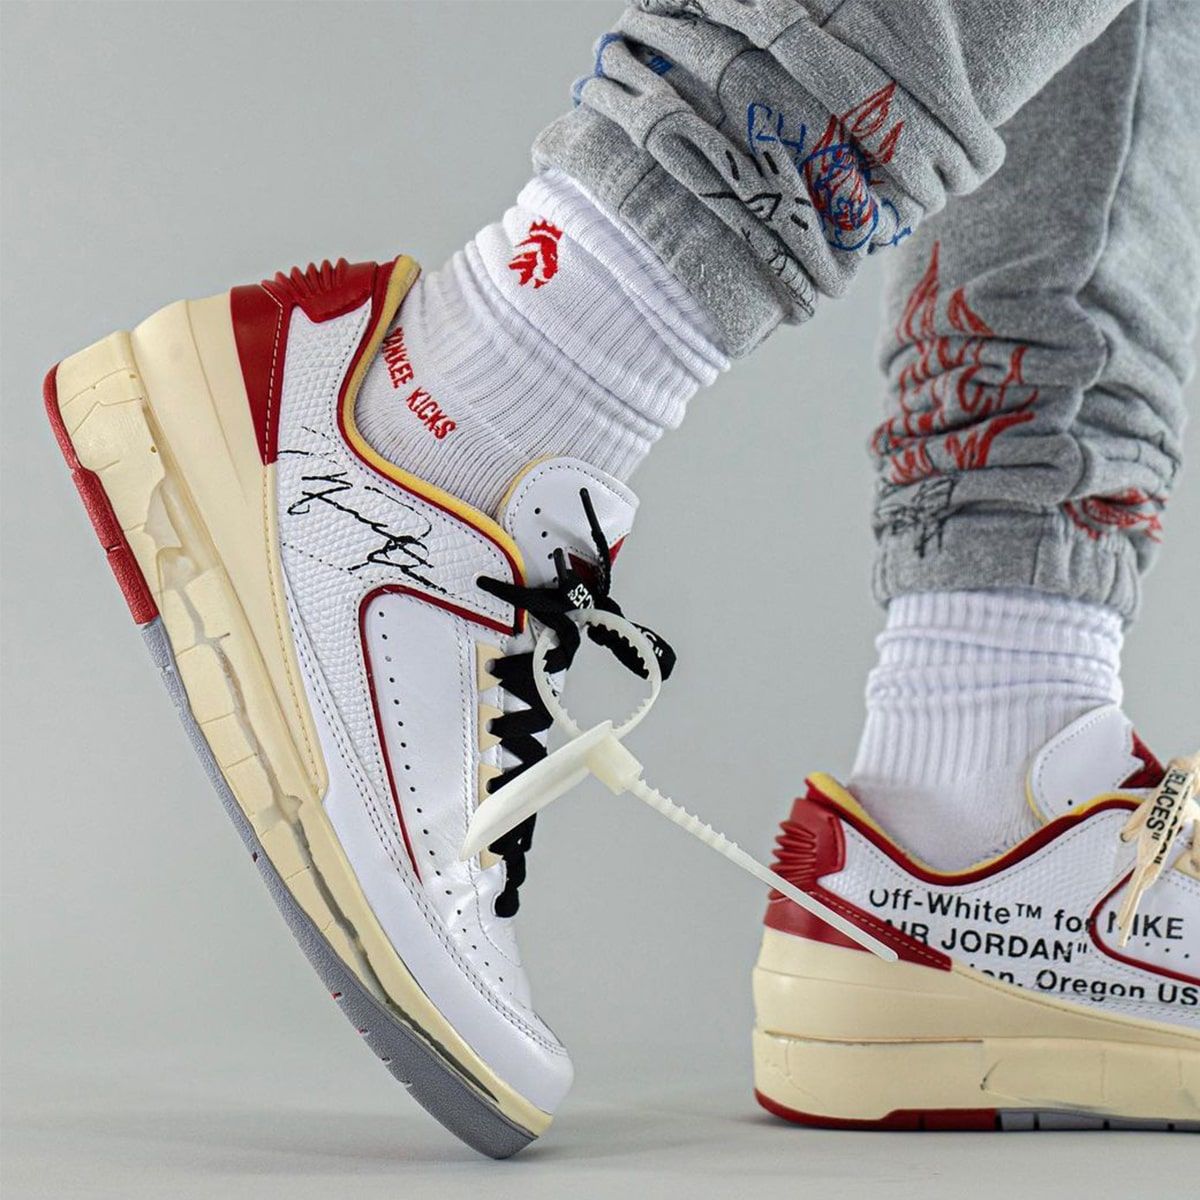 Where to Buy the OFF-WHITE x Air Jordan 2 Low “White/Varsity Red 